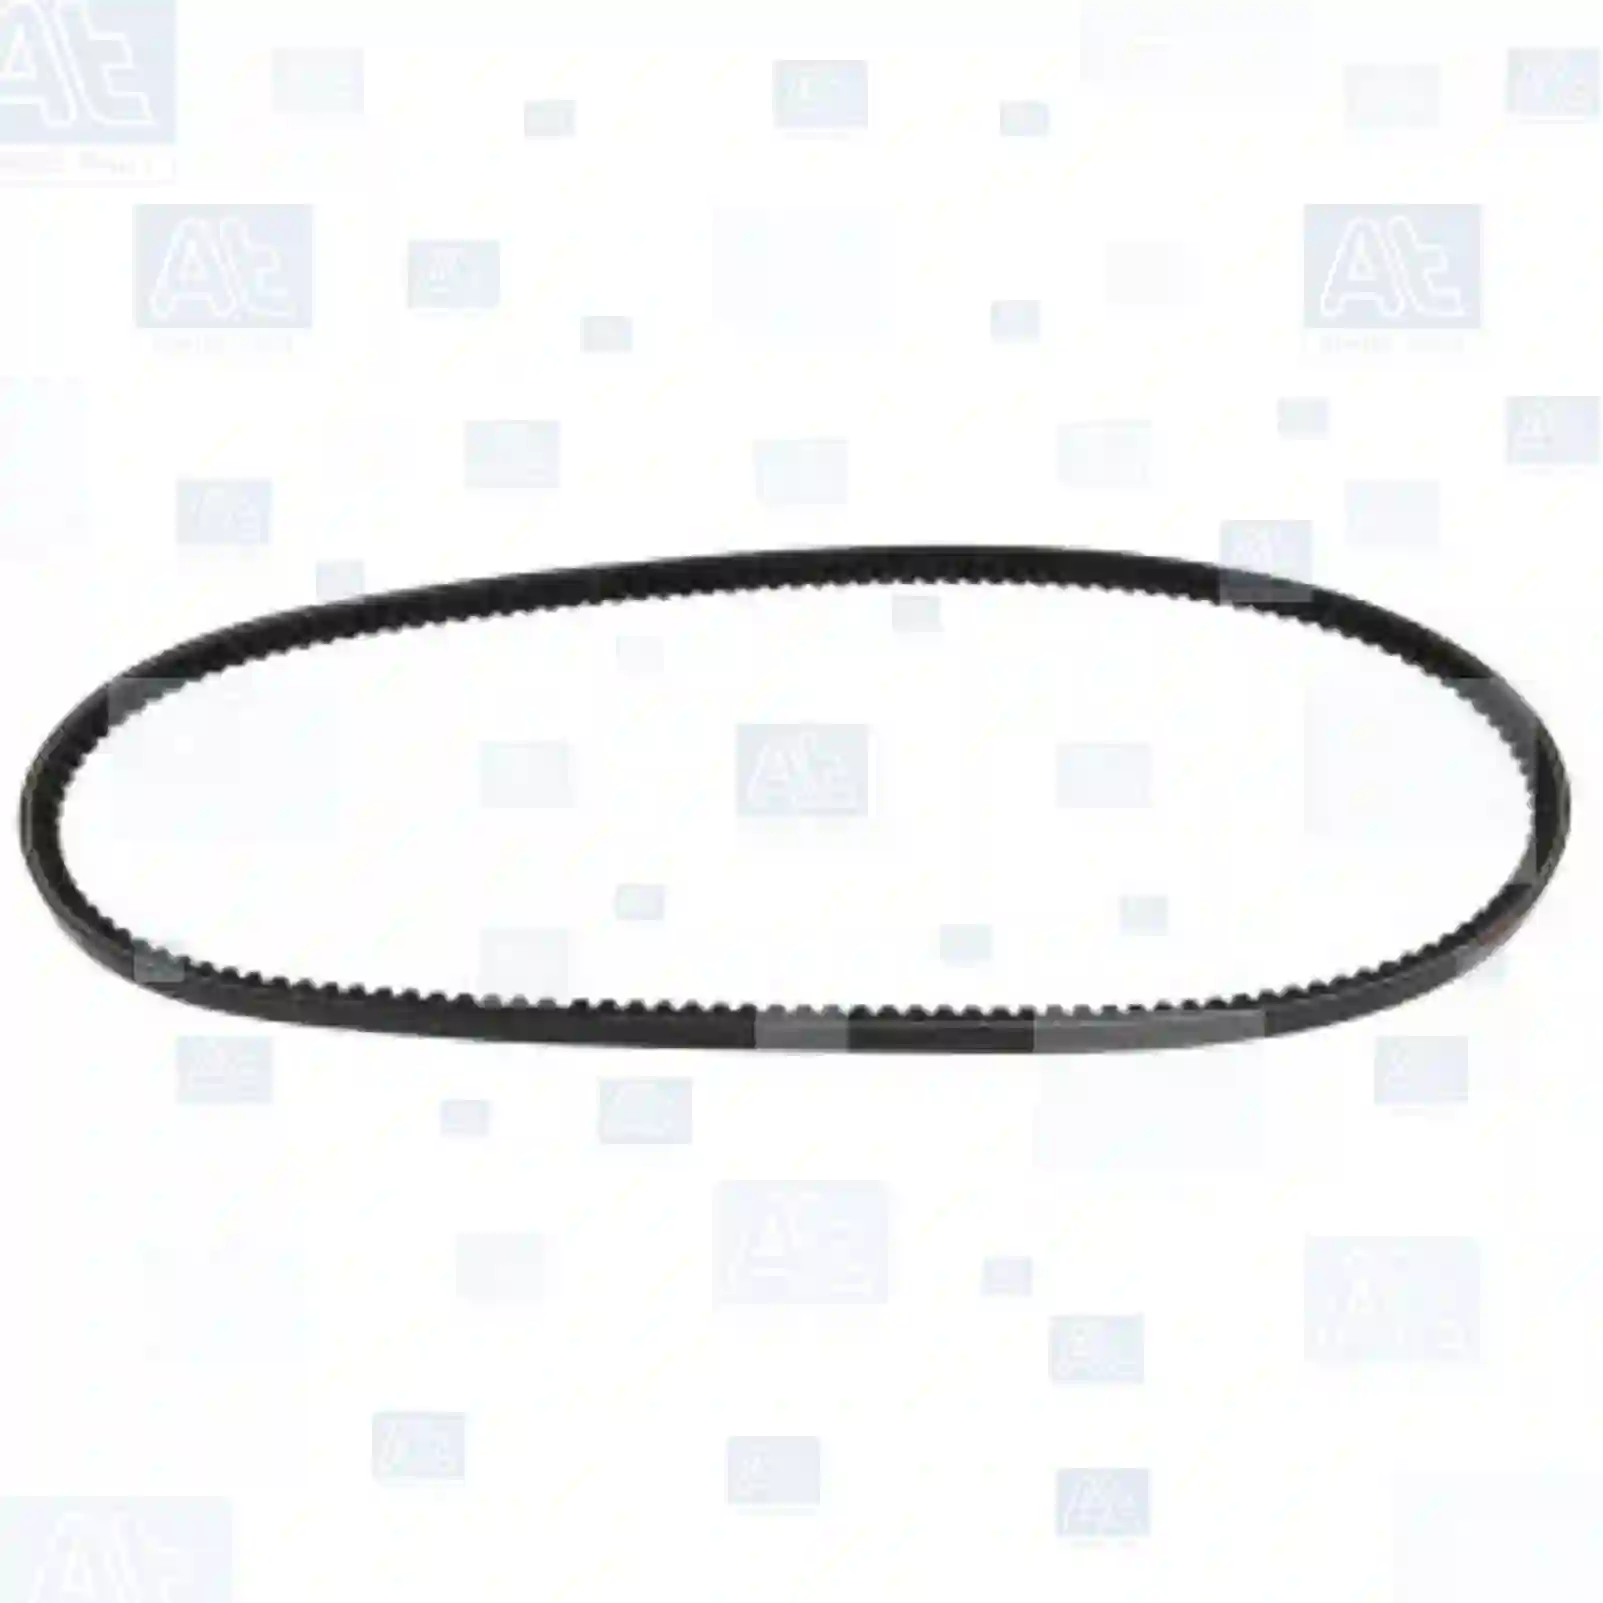 V-belt, at no 77707702, oem no: 035145271J, 7203068, 8825967, 5000666893, 5000786662, 00017067104, 00017067114, 1254885, 1706710, 11511706710, 12311254885, 12311288475, 4483457, B0015386, B0015387, 575014, 007020, 108464, 178478, 178504, 9932100961, 9932100966, 9932150956, 9932150961, 9932150966, 9952150959, 9952150961, 04025787, 04483457, 04610657, 04616155, 04625683, 04625686, 04727032, 07560223, 41800219, 82341655, 1340718, 1340735, 1340753, 90169079, 90410387, 31110-671-003, 31110-671-0030, 31110-671-030, 31110-689-0030, 31110-PA6-661, 31110-PA6-662, 31110-PB1-003, 25211-32000, 25211-32400, 04727032, 41800219, 4727032, 02156019, 82341655, B60118381, E301181, 0079970792, 0079974392, 0079977392, 007753012556, 007753112520, MD025523, MH014065, MH014066, 1340718, 1340753, 6352976, 7203068, 8825967, 575014, 068903137D, 5010222059, 814219, 287513, 814219, 068903137AR, 068903137D, 4766784100, 75221594, 9226505, 9226506, 90916-02098, 90916-02123, 99321-50961, 99332-60975, 960285, 966911, 021903137A, 035145271J, 044903137, 044903137D, 044903137L, 044903137M, 068903137AA, 068903137AT, 068903137D, 068903137T, 088903137T, ZG02324-0008 At Spare Part | Engine, Accelerator Pedal, Camshaft, Connecting Rod, Crankcase, Crankshaft, Cylinder Head, Engine Suspension Mountings, Exhaust Manifold, Exhaust Gas Recirculation, Filter Kits, Flywheel Housing, General Overhaul Kits, Engine, Intake Manifold, Oil Cleaner, Oil Cooler, Oil Filter, Oil Pump, Oil Sump, Piston & Liner, Sensor & Switch, Timing Case, Turbocharger, Cooling System, Belt Tensioner, Coolant Filter, Coolant Pipe, Corrosion Prevention Agent, Drive, Expansion Tank, Fan, Intercooler, Monitors & Gauges, Radiator, Thermostat, V-Belt / Timing belt, Water Pump, Fuel System, Electronical Injector Unit, Feed Pump, Fuel Filter, cpl., Fuel Gauge Sender,  Fuel Line, Fuel Pump, Fuel Tank, Injection Line Kit, Injection Pump, Exhaust System, Clutch & Pedal, Gearbox, Propeller Shaft, Axles, Brake System, Hubs & Wheels, Suspension, Leaf Spring, Universal Parts / Accessories, Steering, Electrical System, Cabin V-belt, at no 77707702, oem no: 035145271J, 7203068, 8825967, 5000666893, 5000786662, 00017067104, 00017067114, 1254885, 1706710, 11511706710, 12311254885, 12311288475, 4483457, B0015386, B0015387, 575014, 007020, 108464, 178478, 178504, 9932100961, 9932100966, 9932150956, 9932150961, 9932150966, 9952150959, 9952150961, 04025787, 04483457, 04610657, 04616155, 04625683, 04625686, 04727032, 07560223, 41800219, 82341655, 1340718, 1340735, 1340753, 90169079, 90410387, 31110-671-003, 31110-671-0030, 31110-671-030, 31110-689-0030, 31110-PA6-661, 31110-PA6-662, 31110-PB1-003, 25211-32000, 25211-32400, 04727032, 41800219, 4727032, 02156019, 82341655, B60118381, E301181, 0079970792, 0079974392, 0079977392, 007753012556, 007753112520, MD025523, MH014065, MH014066, 1340718, 1340753, 6352976, 7203068, 8825967, 575014, 068903137D, 5010222059, 814219, 287513, 814219, 068903137AR, 068903137D, 4766784100, 75221594, 9226505, 9226506, 90916-02098, 90916-02123, 99321-50961, 99332-60975, 960285, 966911, 021903137A, 035145271J, 044903137, 044903137D, 044903137L, 044903137M, 068903137AA, 068903137AT, 068903137D, 068903137T, 088903137T, ZG02324-0008 At Spare Part | Engine, Accelerator Pedal, Camshaft, Connecting Rod, Crankcase, Crankshaft, Cylinder Head, Engine Suspension Mountings, Exhaust Manifold, Exhaust Gas Recirculation, Filter Kits, Flywheel Housing, General Overhaul Kits, Engine, Intake Manifold, Oil Cleaner, Oil Cooler, Oil Filter, Oil Pump, Oil Sump, Piston & Liner, Sensor & Switch, Timing Case, Turbocharger, Cooling System, Belt Tensioner, Coolant Filter, Coolant Pipe, Corrosion Prevention Agent, Drive, Expansion Tank, Fan, Intercooler, Monitors & Gauges, Radiator, Thermostat, V-Belt / Timing belt, Water Pump, Fuel System, Electronical Injector Unit, Feed Pump, Fuel Filter, cpl., Fuel Gauge Sender,  Fuel Line, Fuel Pump, Fuel Tank, Injection Line Kit, Injection Pump, Exhaust System, Clutch & Pedal, Gearbox, Propeller Shaft, Axles, Brake System, Hubs & Wheels, Suspension, Leaf Spring, Universal Parts / Accessories, Steering, Electrical System, Cabin